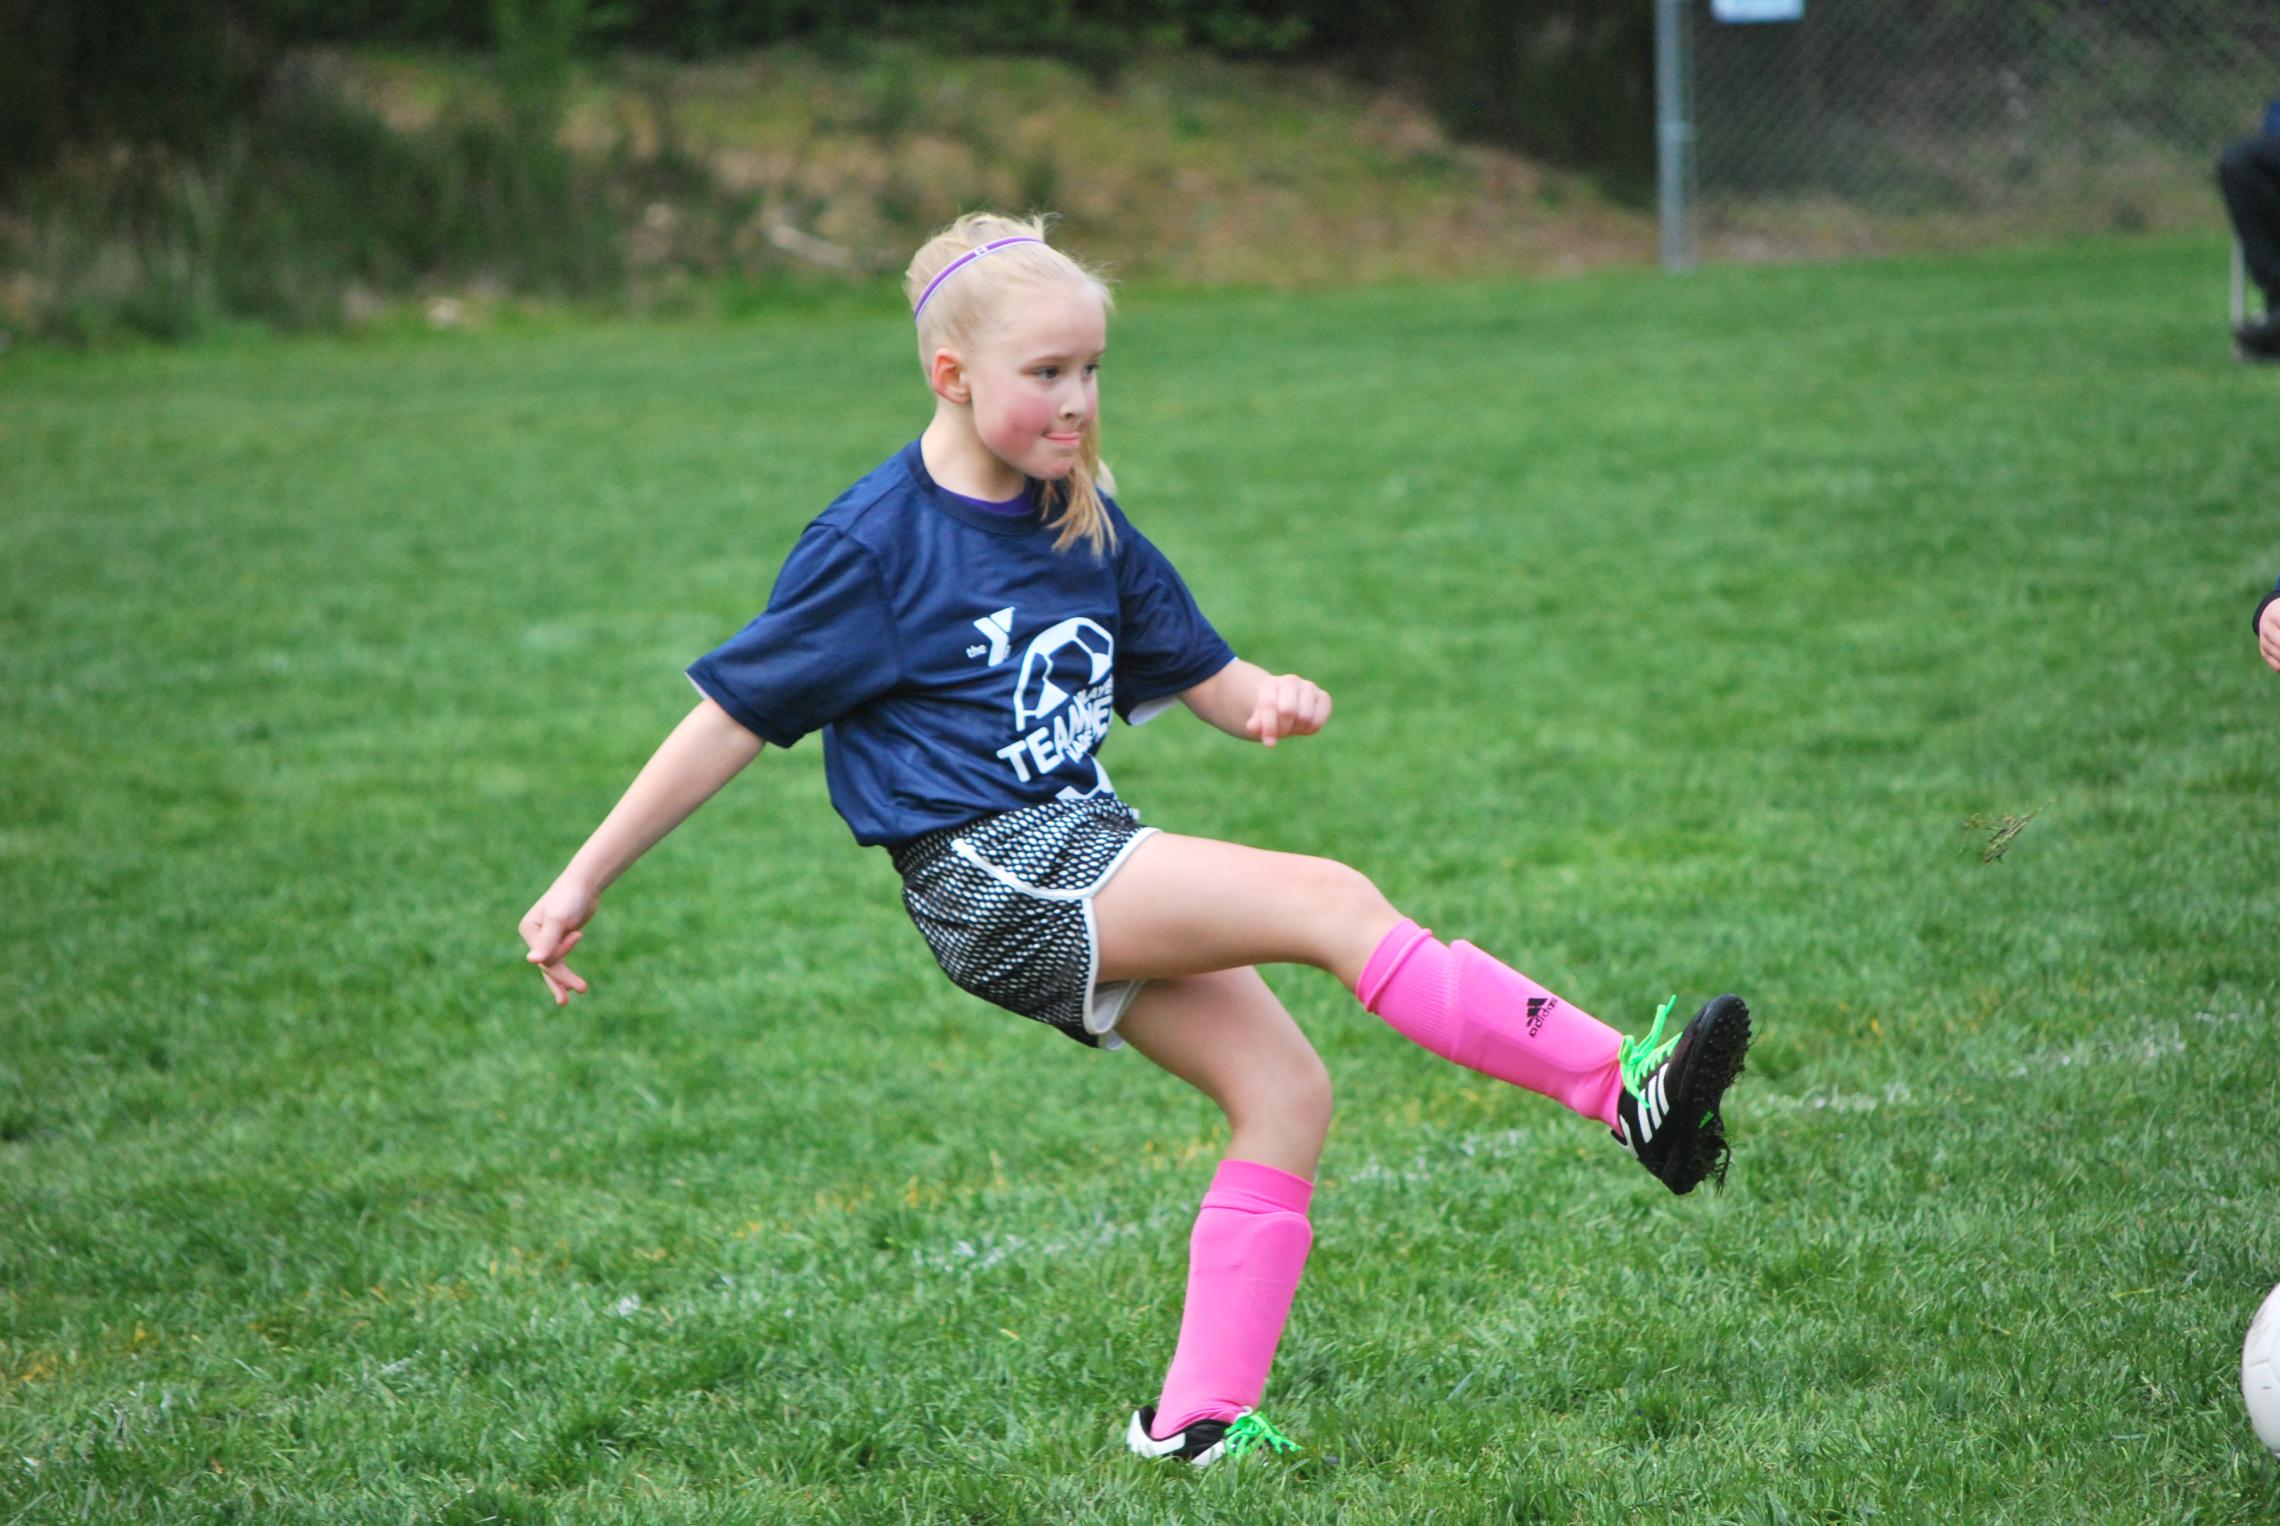 youth soccer player making a kick